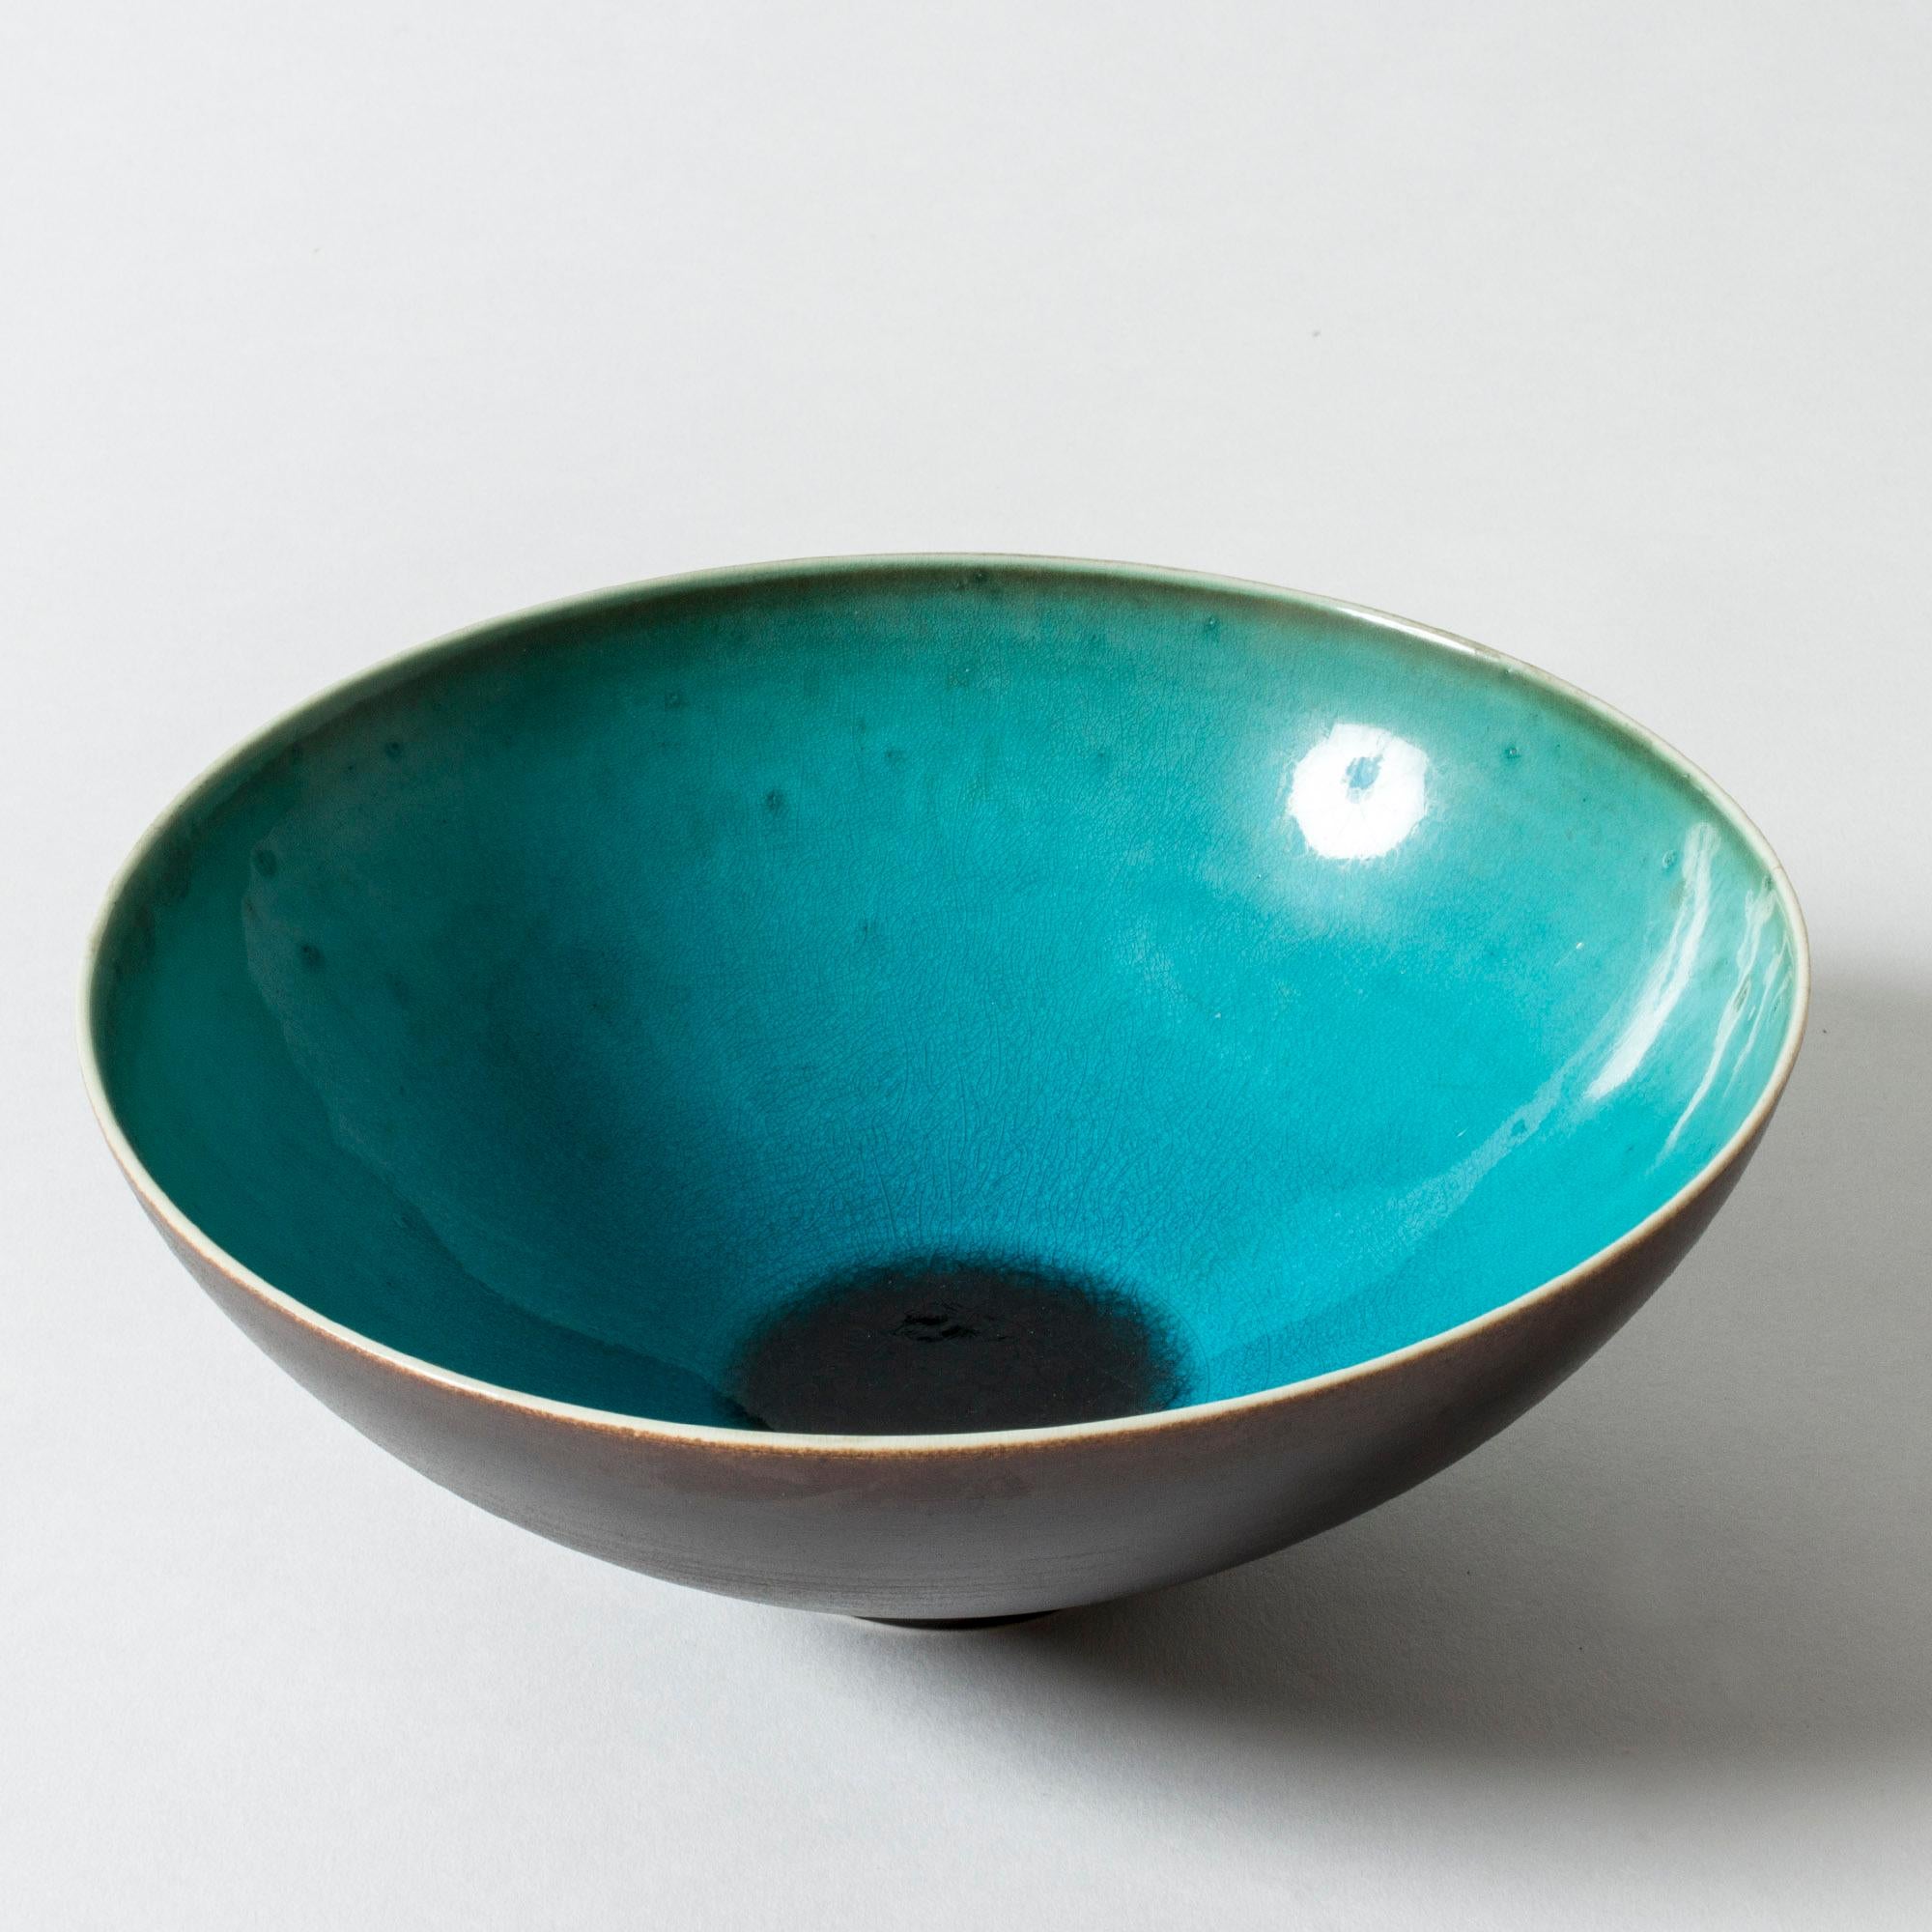 Stoneware bowl by Friedl Holzer-Kjellberg. Smooth lines with dark brown outside and vibrant aquamarine glaze inside.